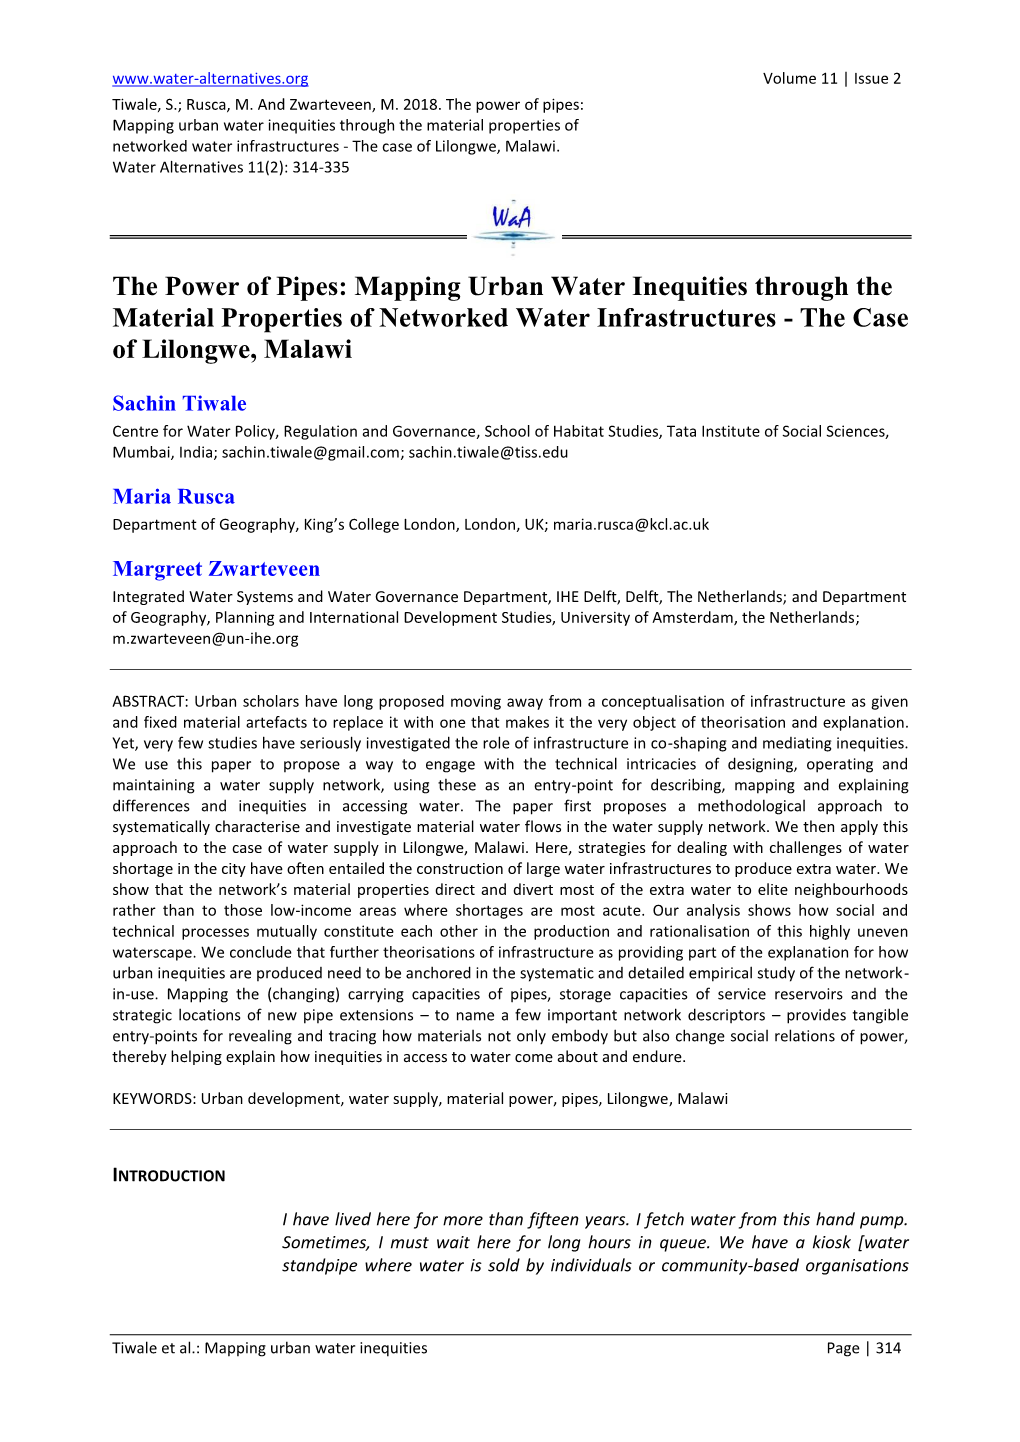 The Power of Pipes: Mapping Urban Water Inequities Through the Material Properties of Networked Water Infrastructures - the Case of Lilongwe, Malawi